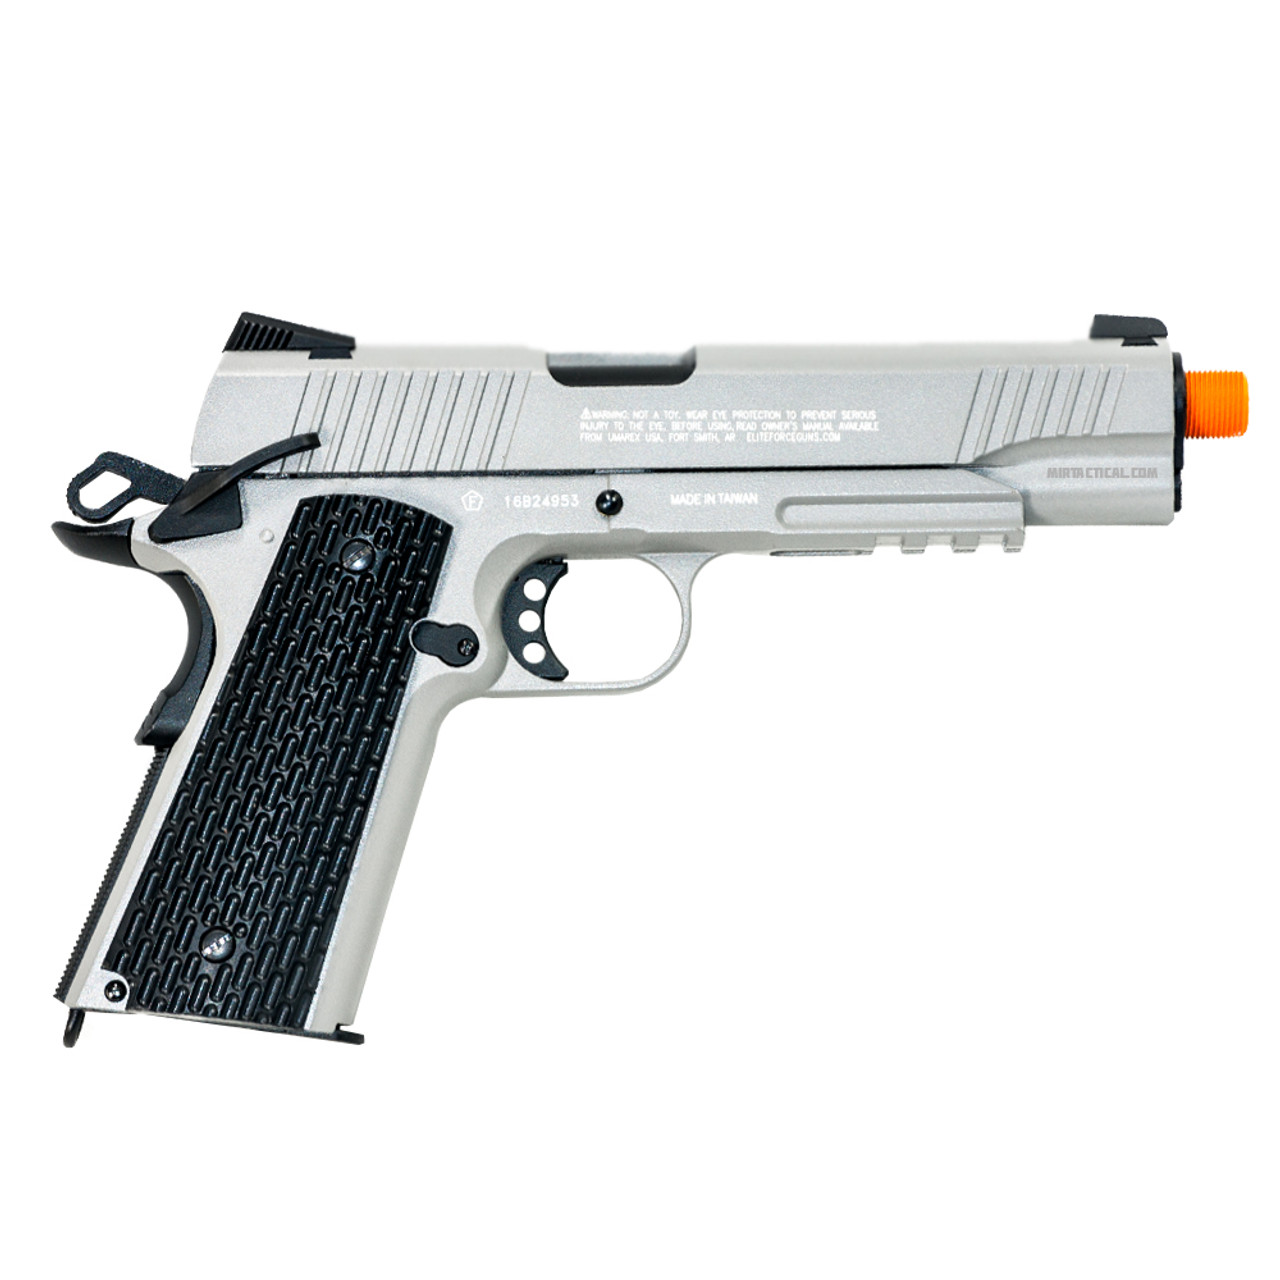 Elite Force Silver CO2 1911 Airsoft Pistol